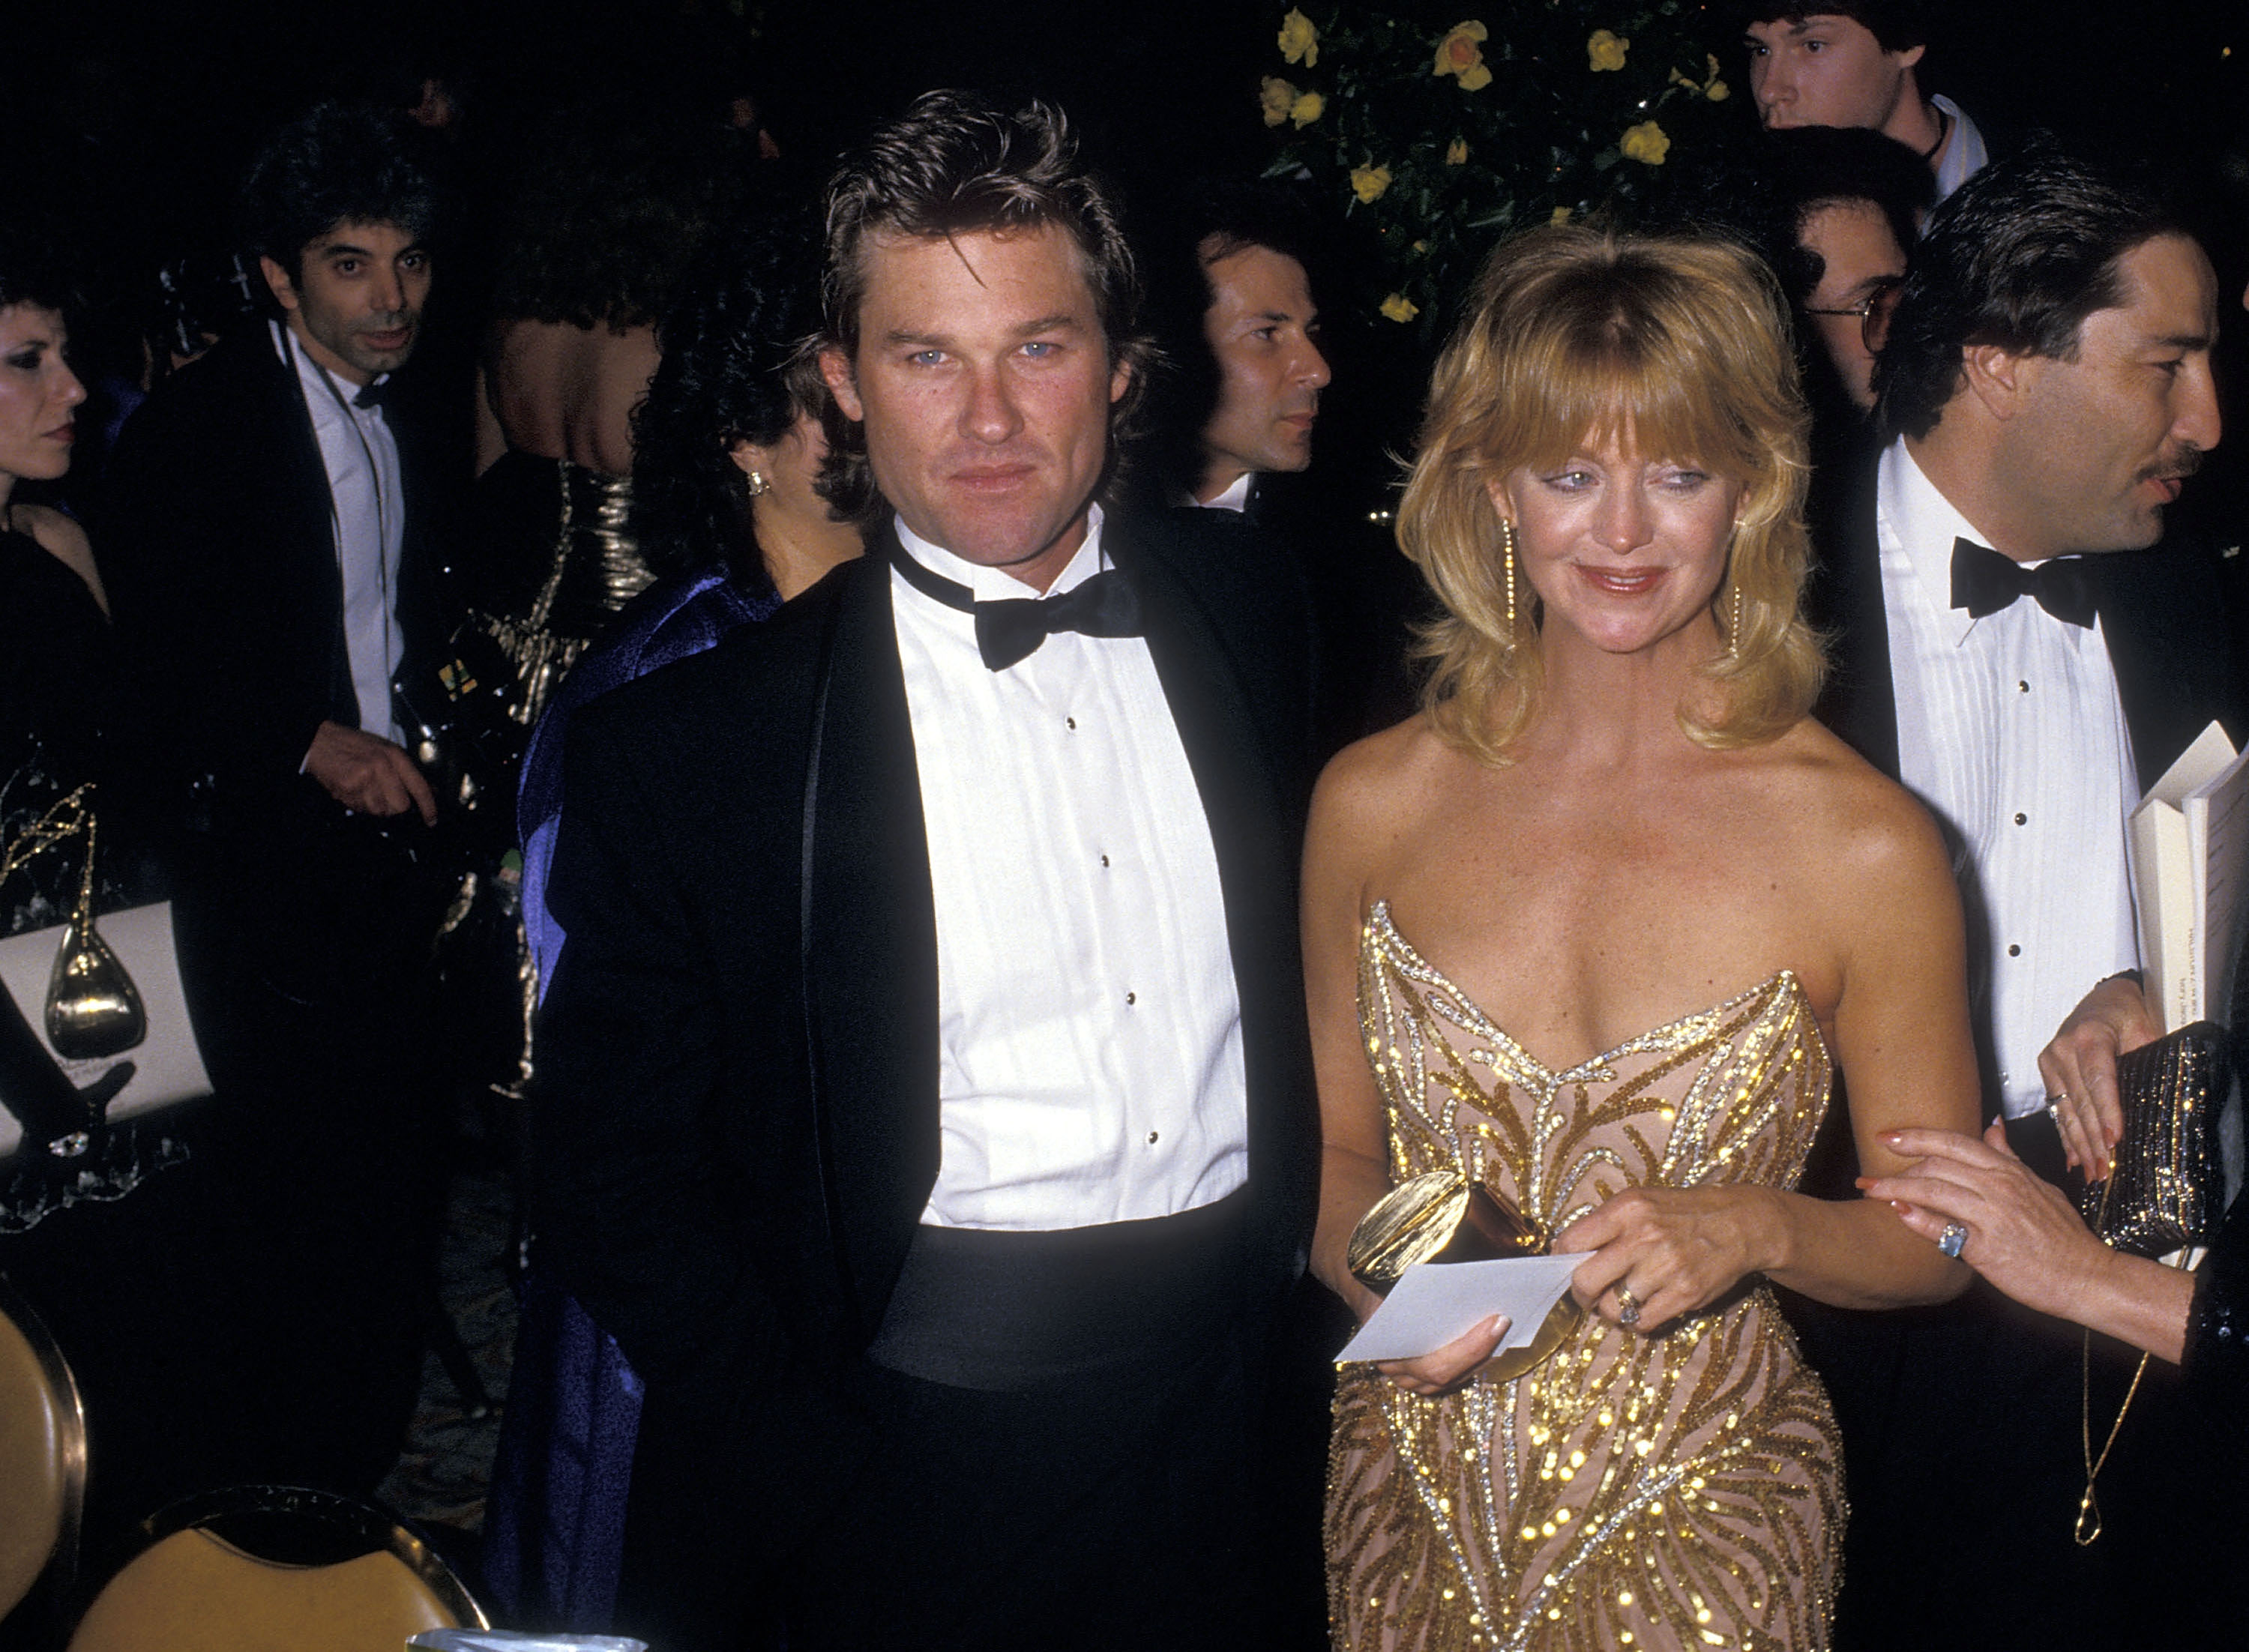 Kurt Russell and Goldie Hawn attend the American Committee for the Tel Aviv Foundation Honors Goldie Hawn at Century Plaza Hotel on January 27, 1987 in Los Angeles, California. l Source: Getty Images